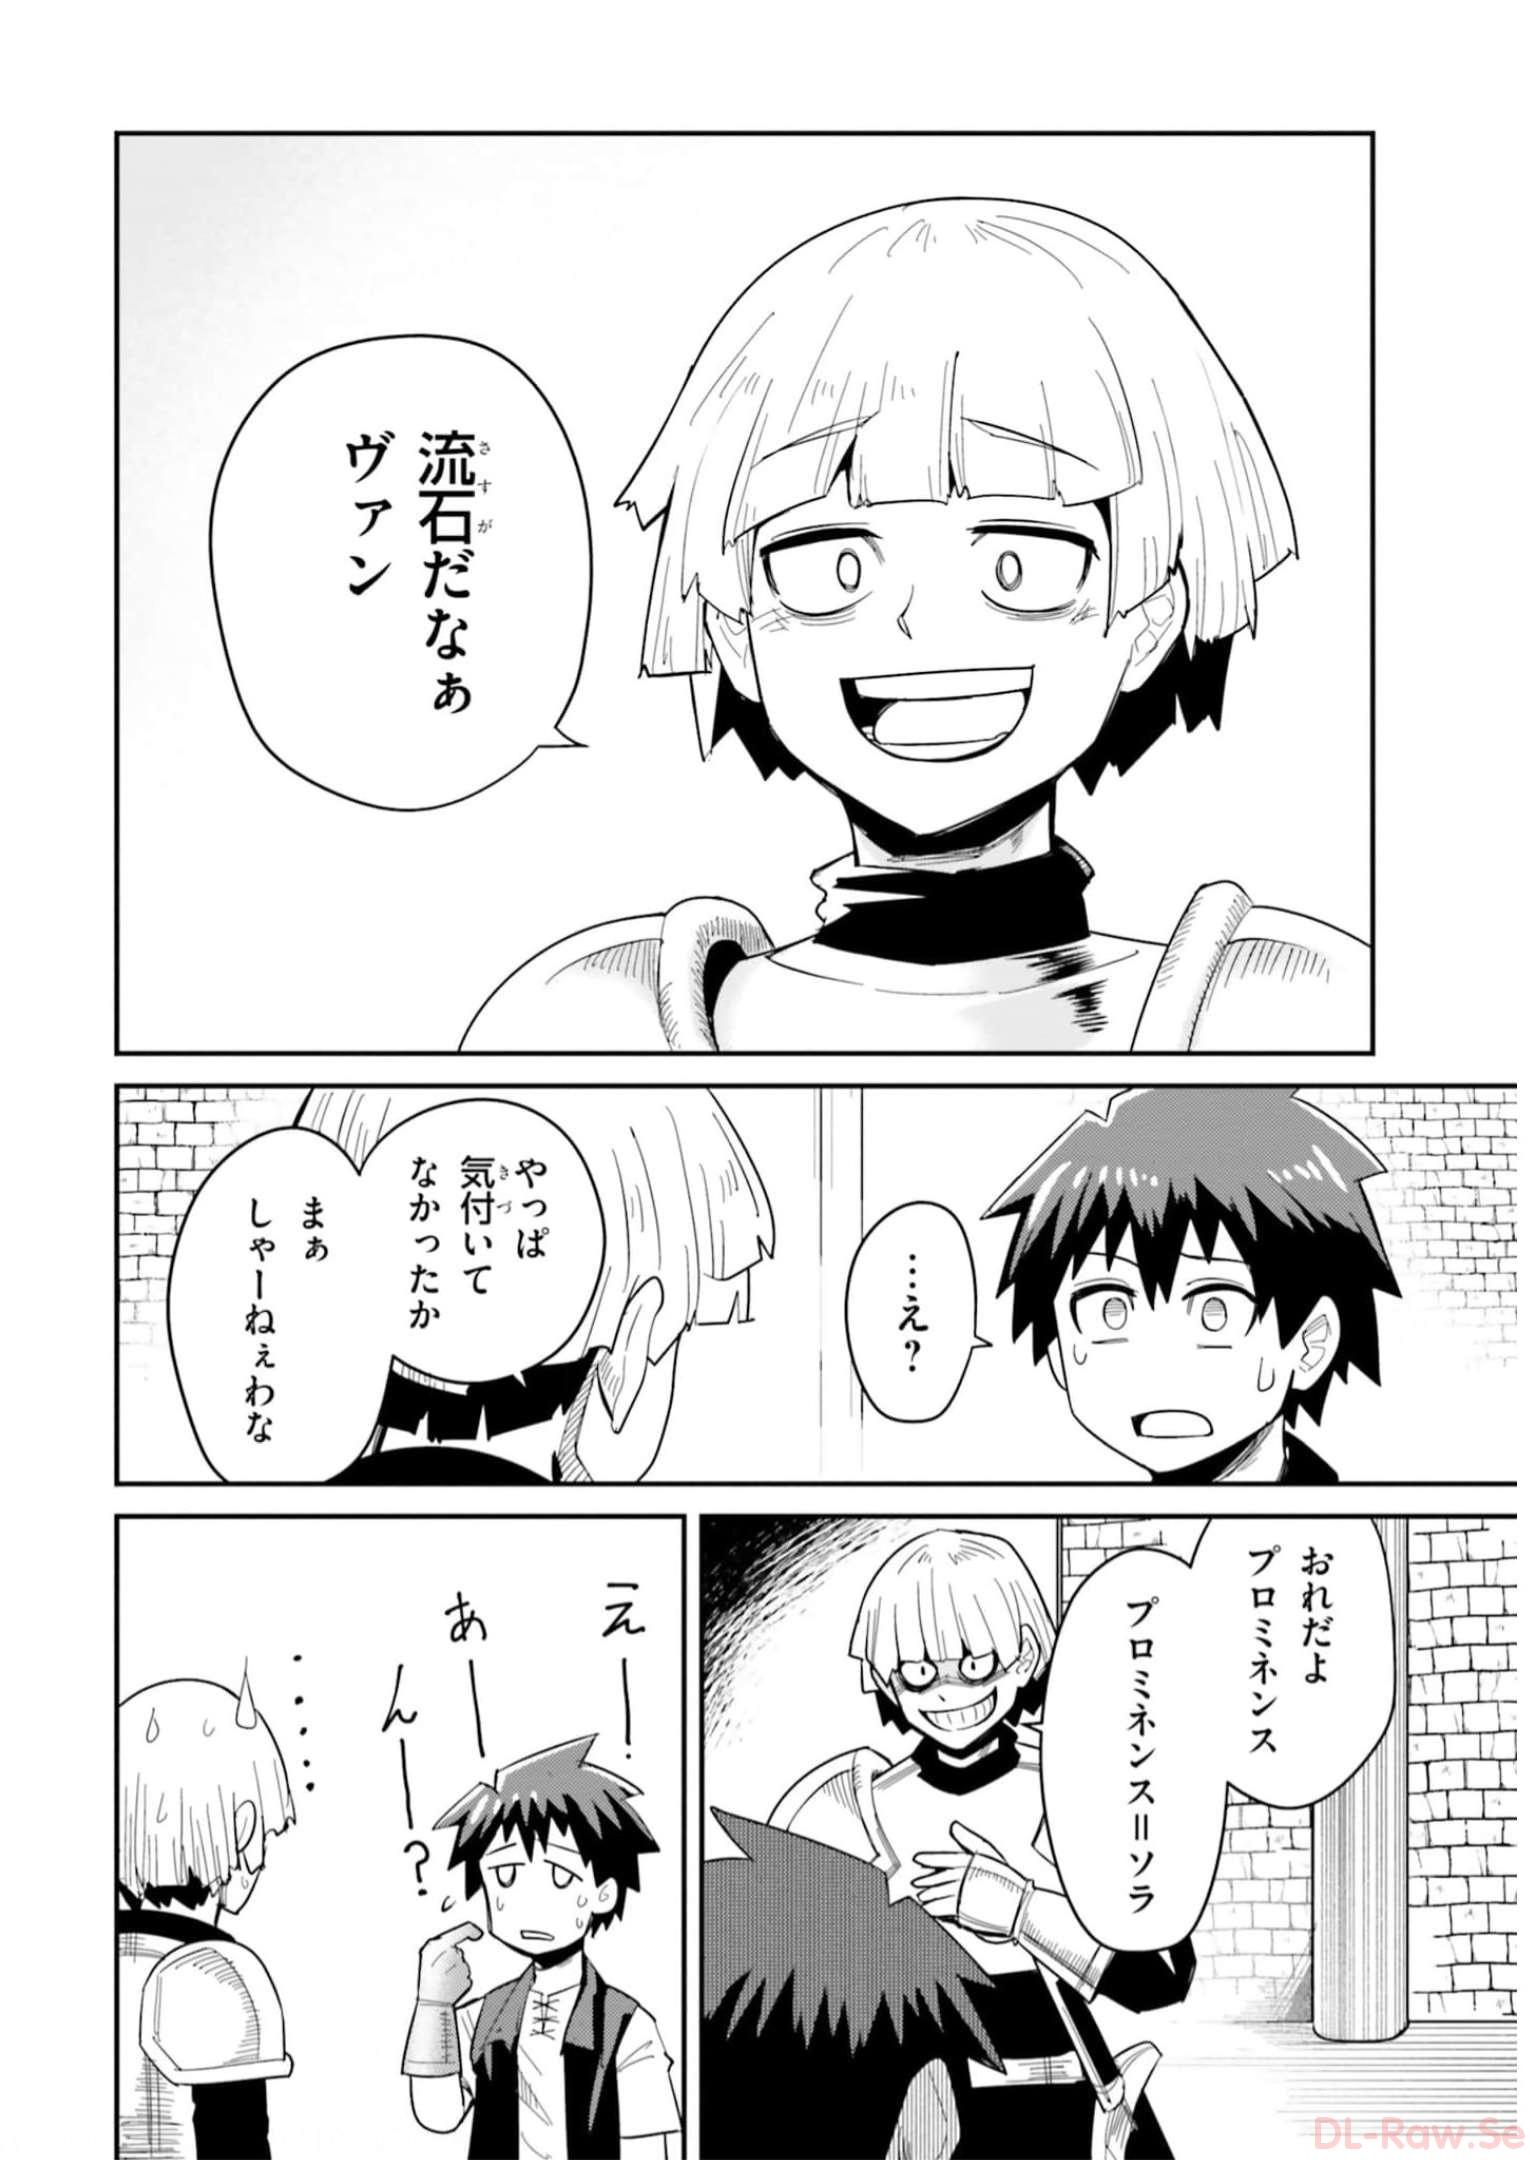 Dungeon Friends Forever Dungeon's Childhood Friend ダンジョンの幼なじみ 第27話 - Page 15